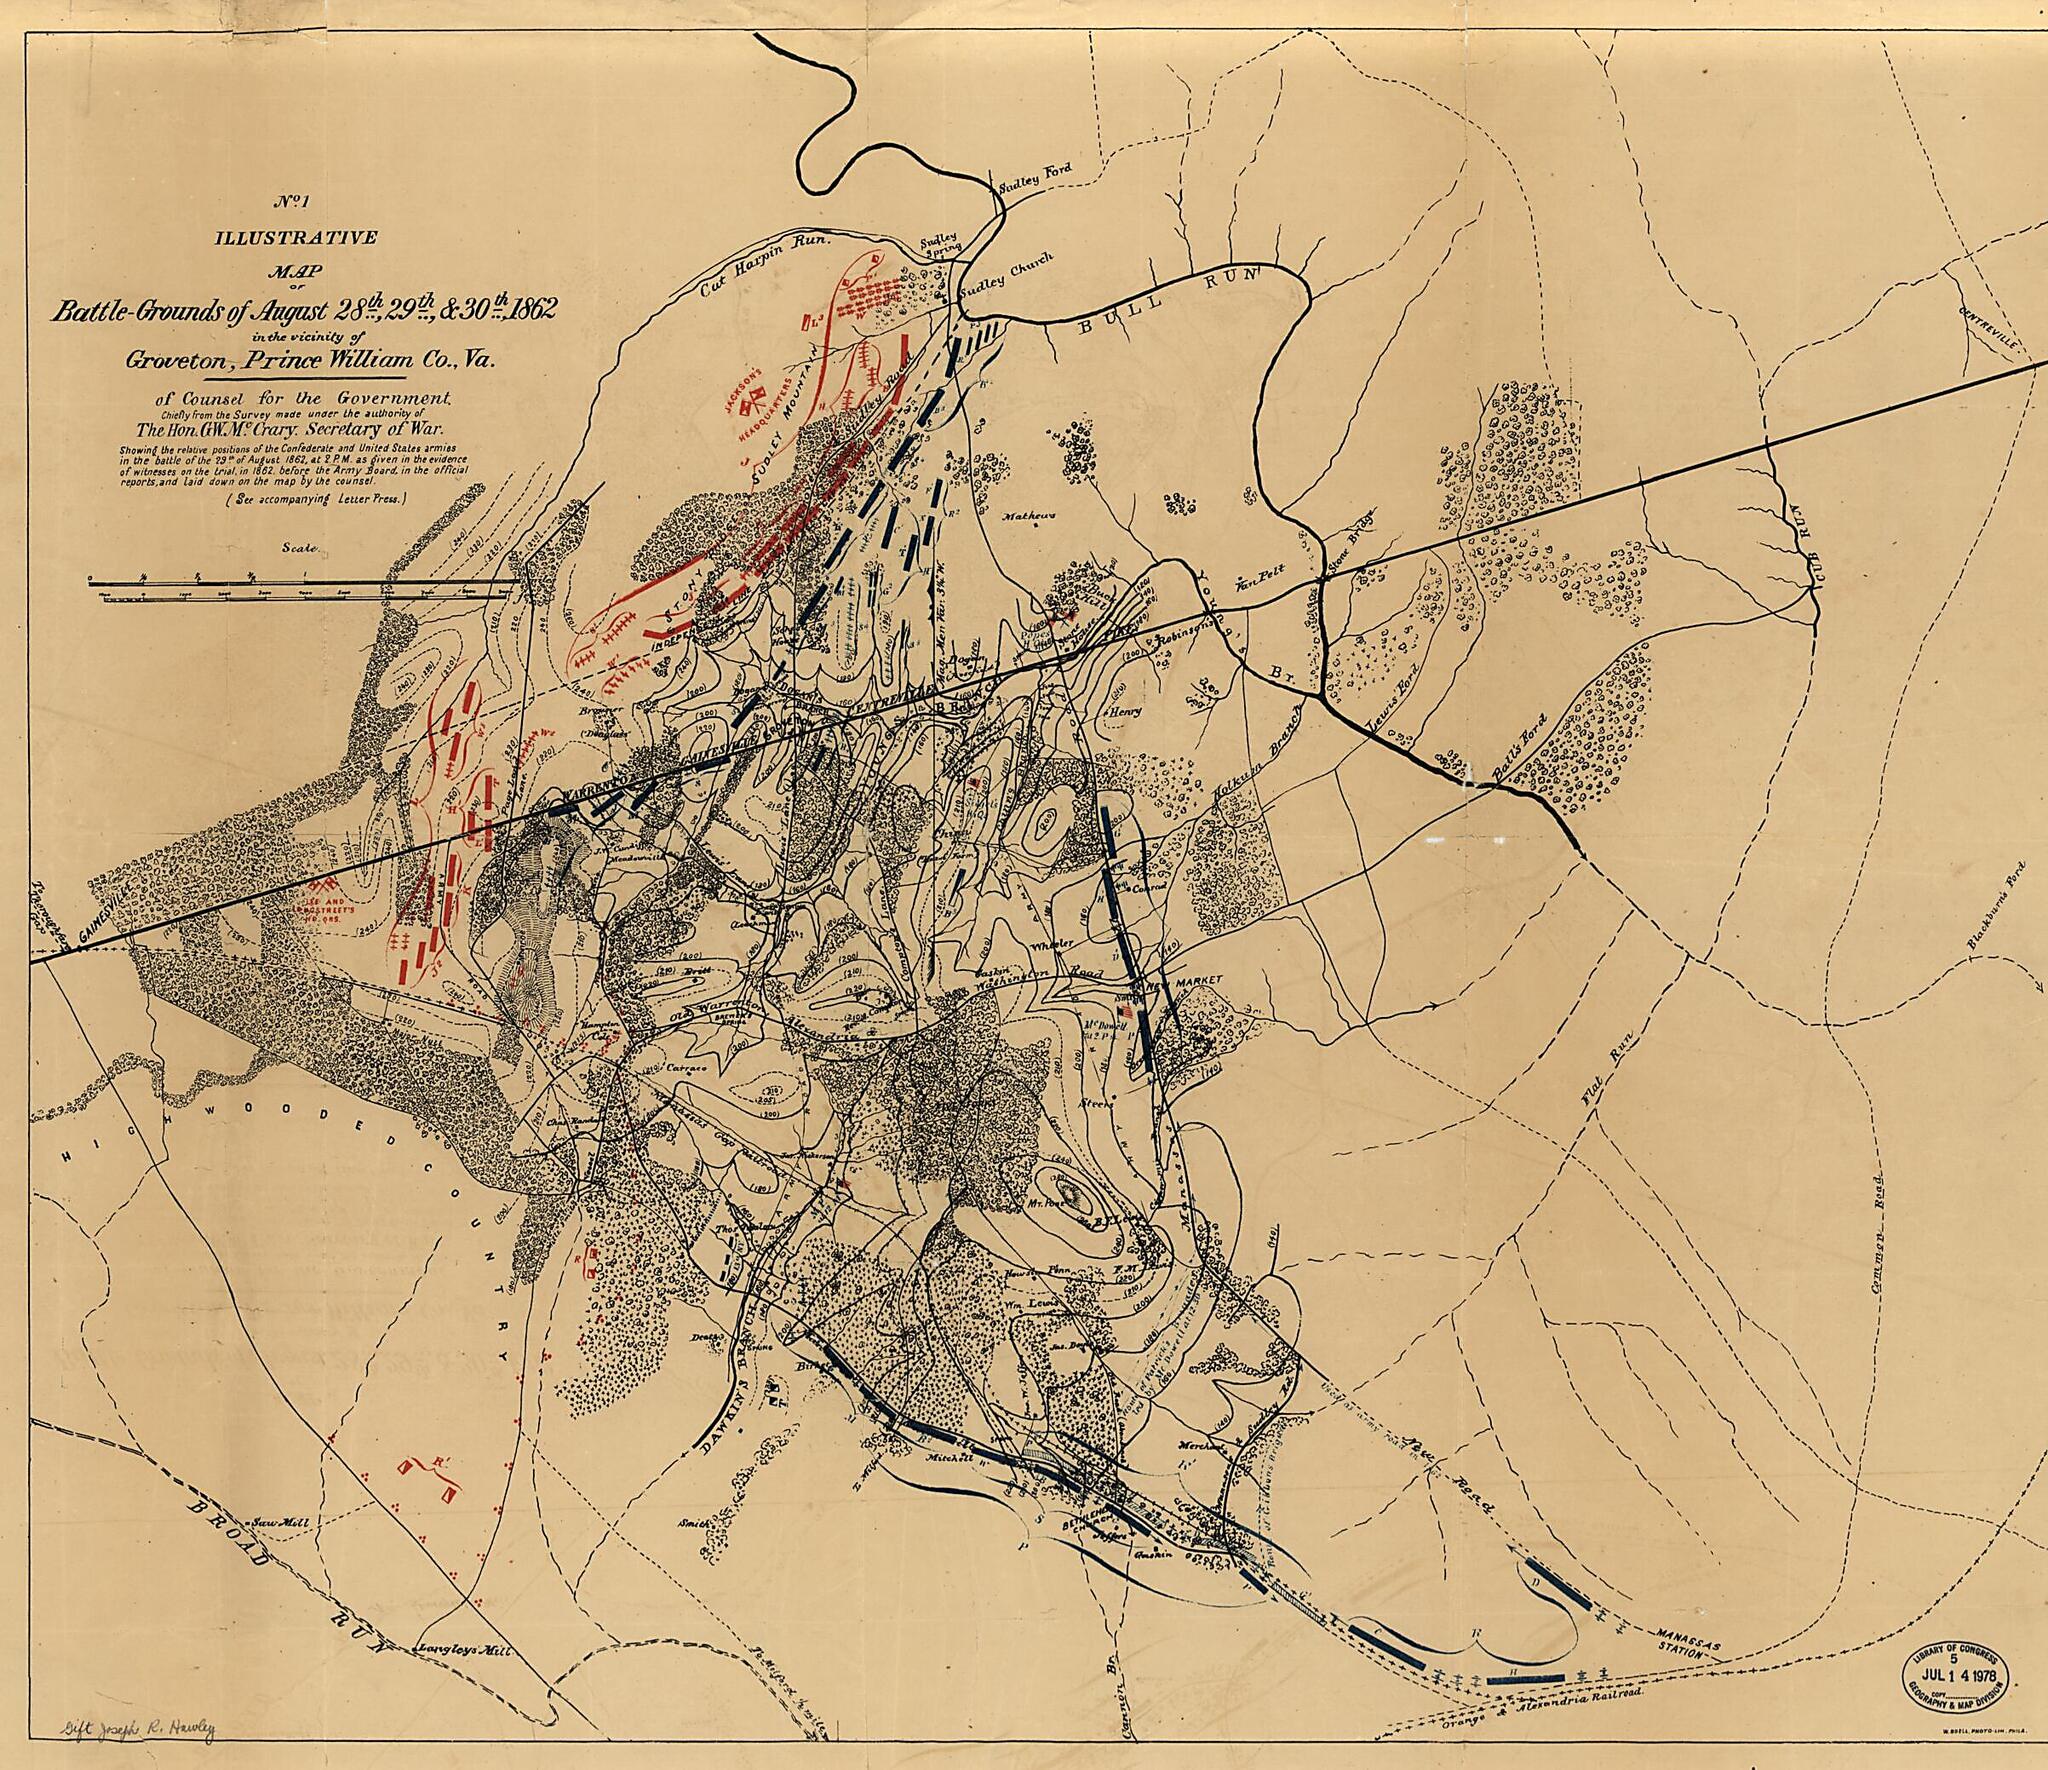 This old map of Grounds of August 28th, 29th &amp; 30th, 1862, In the Vicinity of Groveton, Prince William County, Va. : of Counsel for the Government, Chiefly from the Survey Made Under the Authority of the Hon. G. W. McCrary, Secretary of War from 1878 was